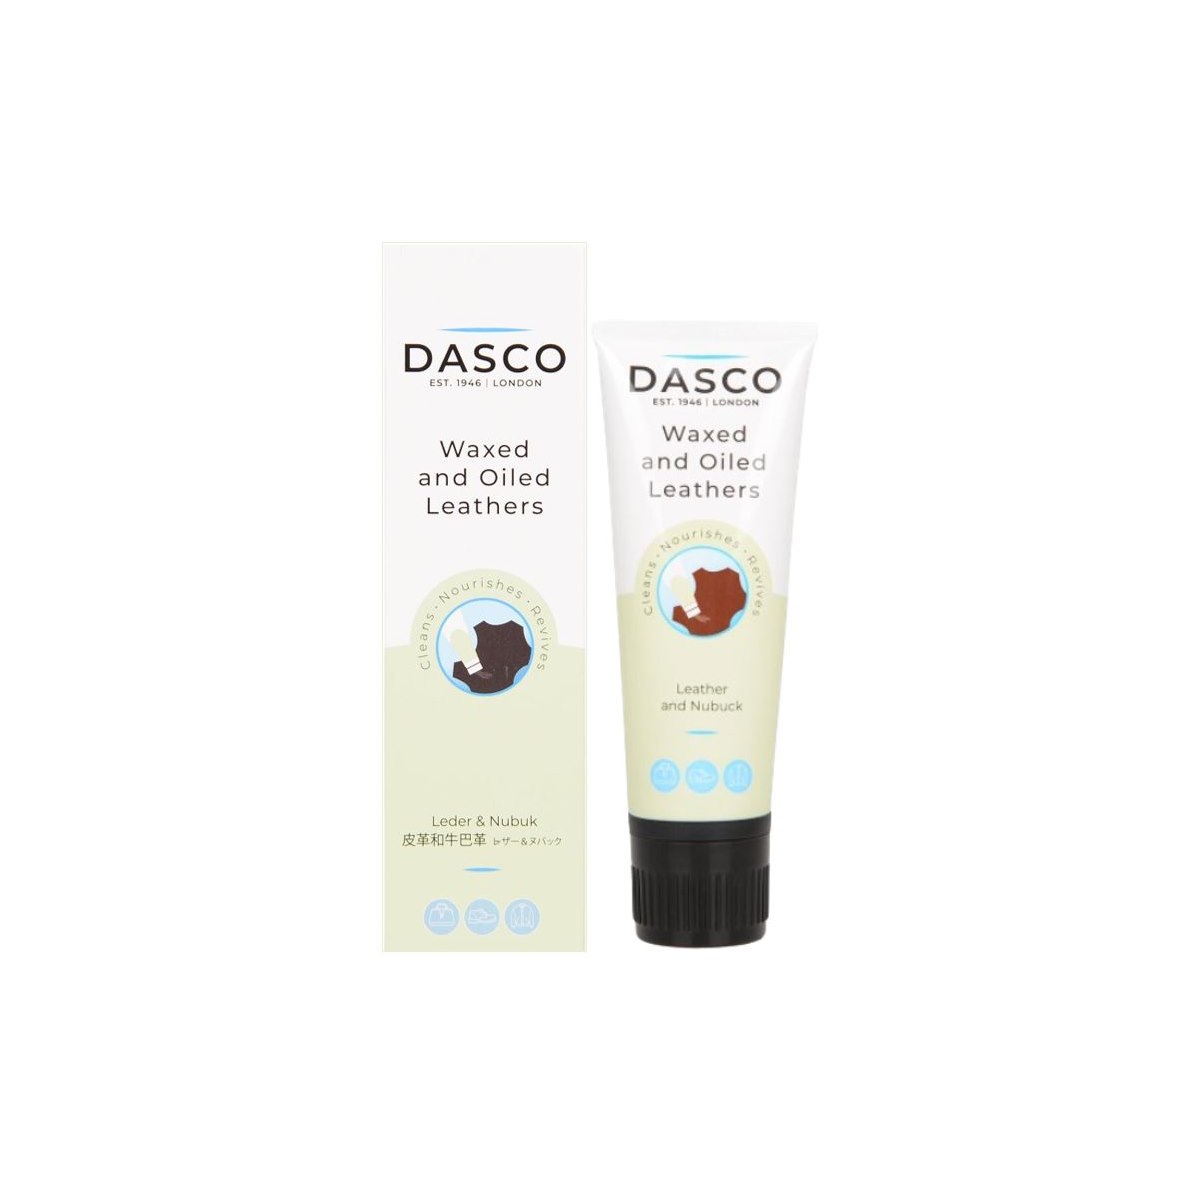 Dasco Waxed and Oiled Leathers Packaging 75ml